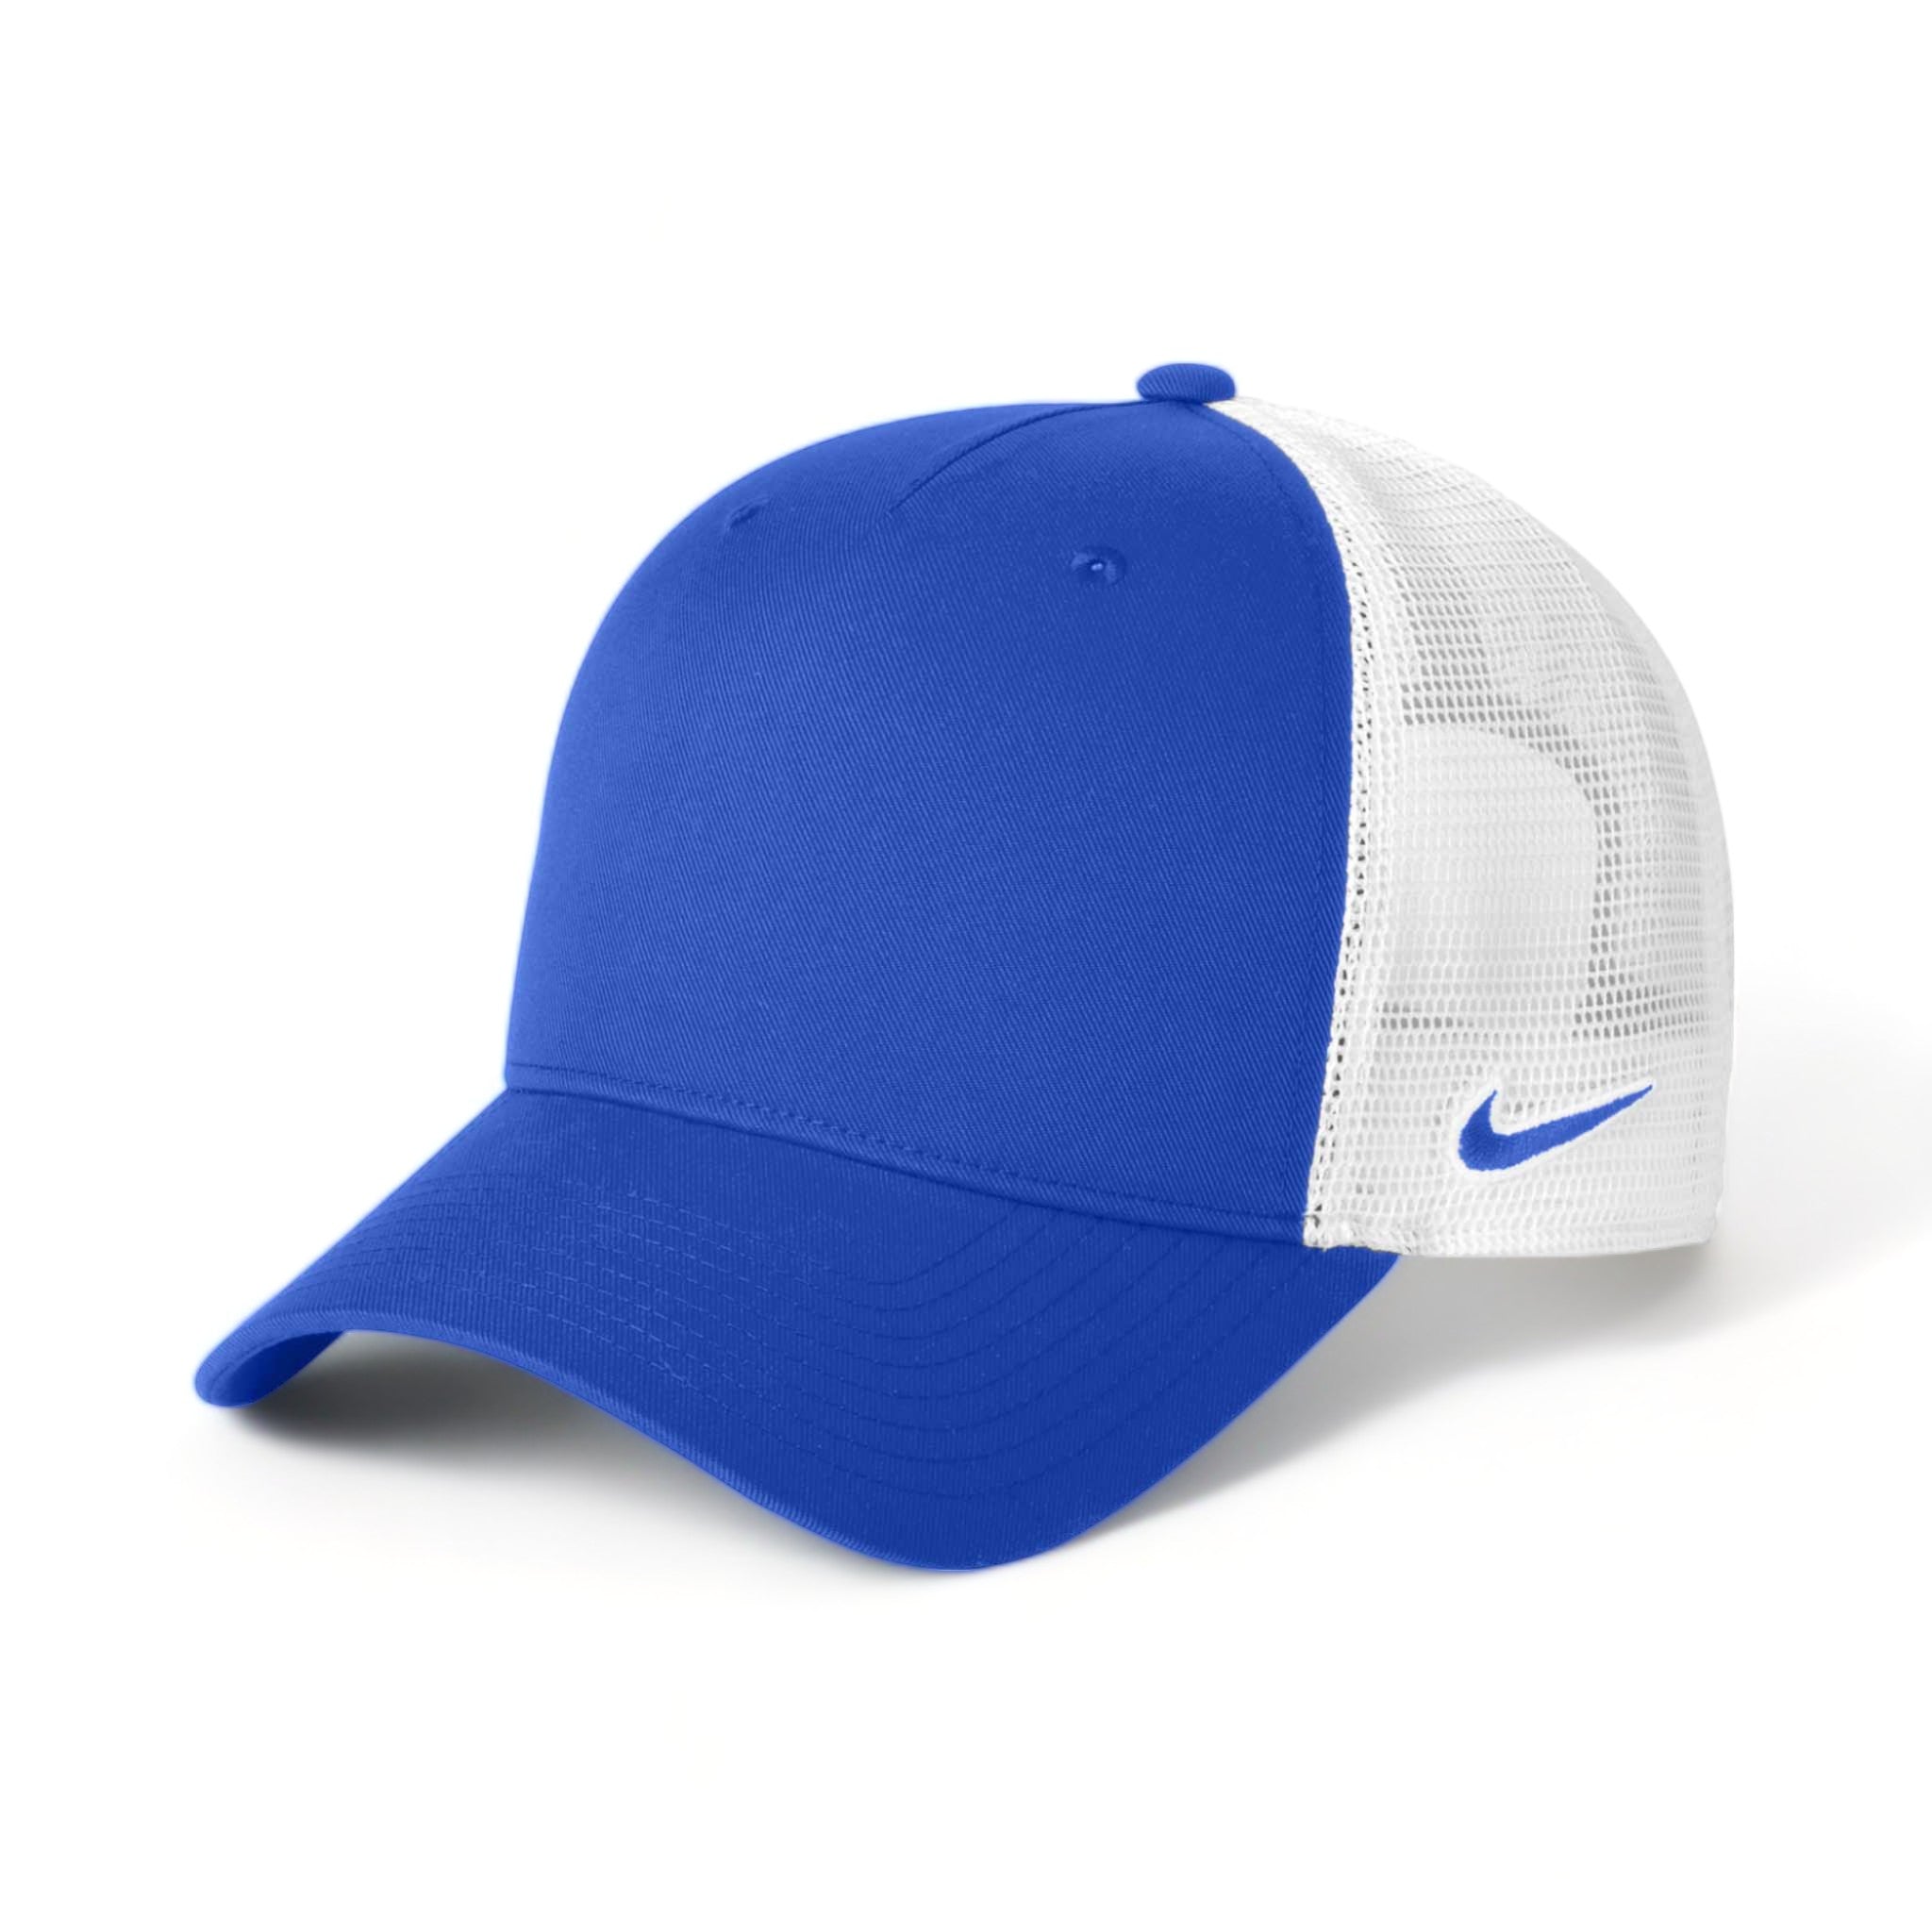 Side view of Nike NKFN9893 custom hat in game royal and white